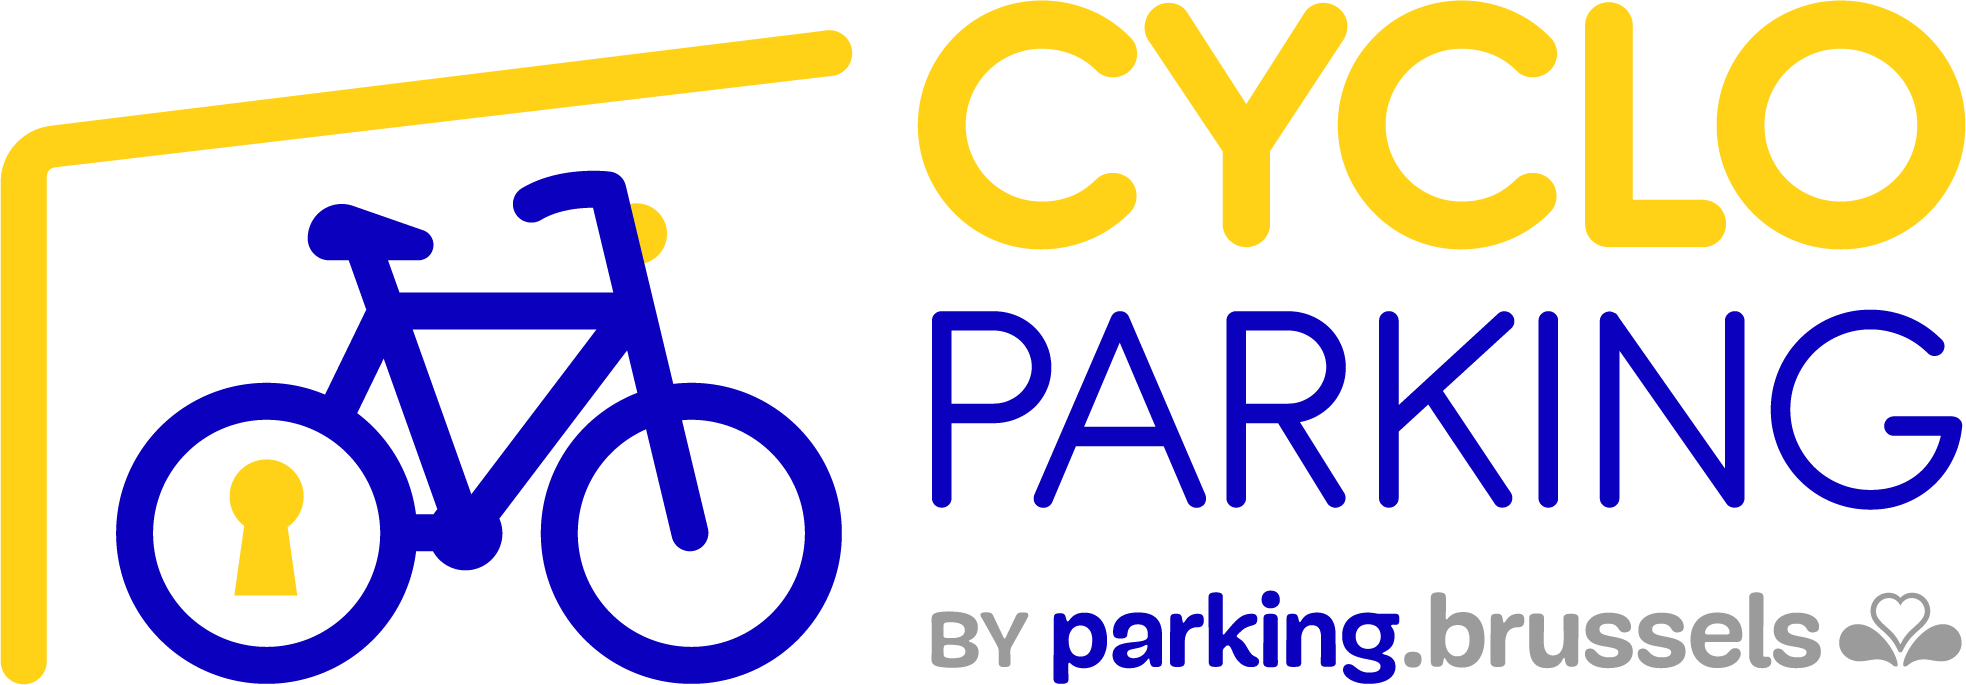 Cycloparking (by Parking.brussels)